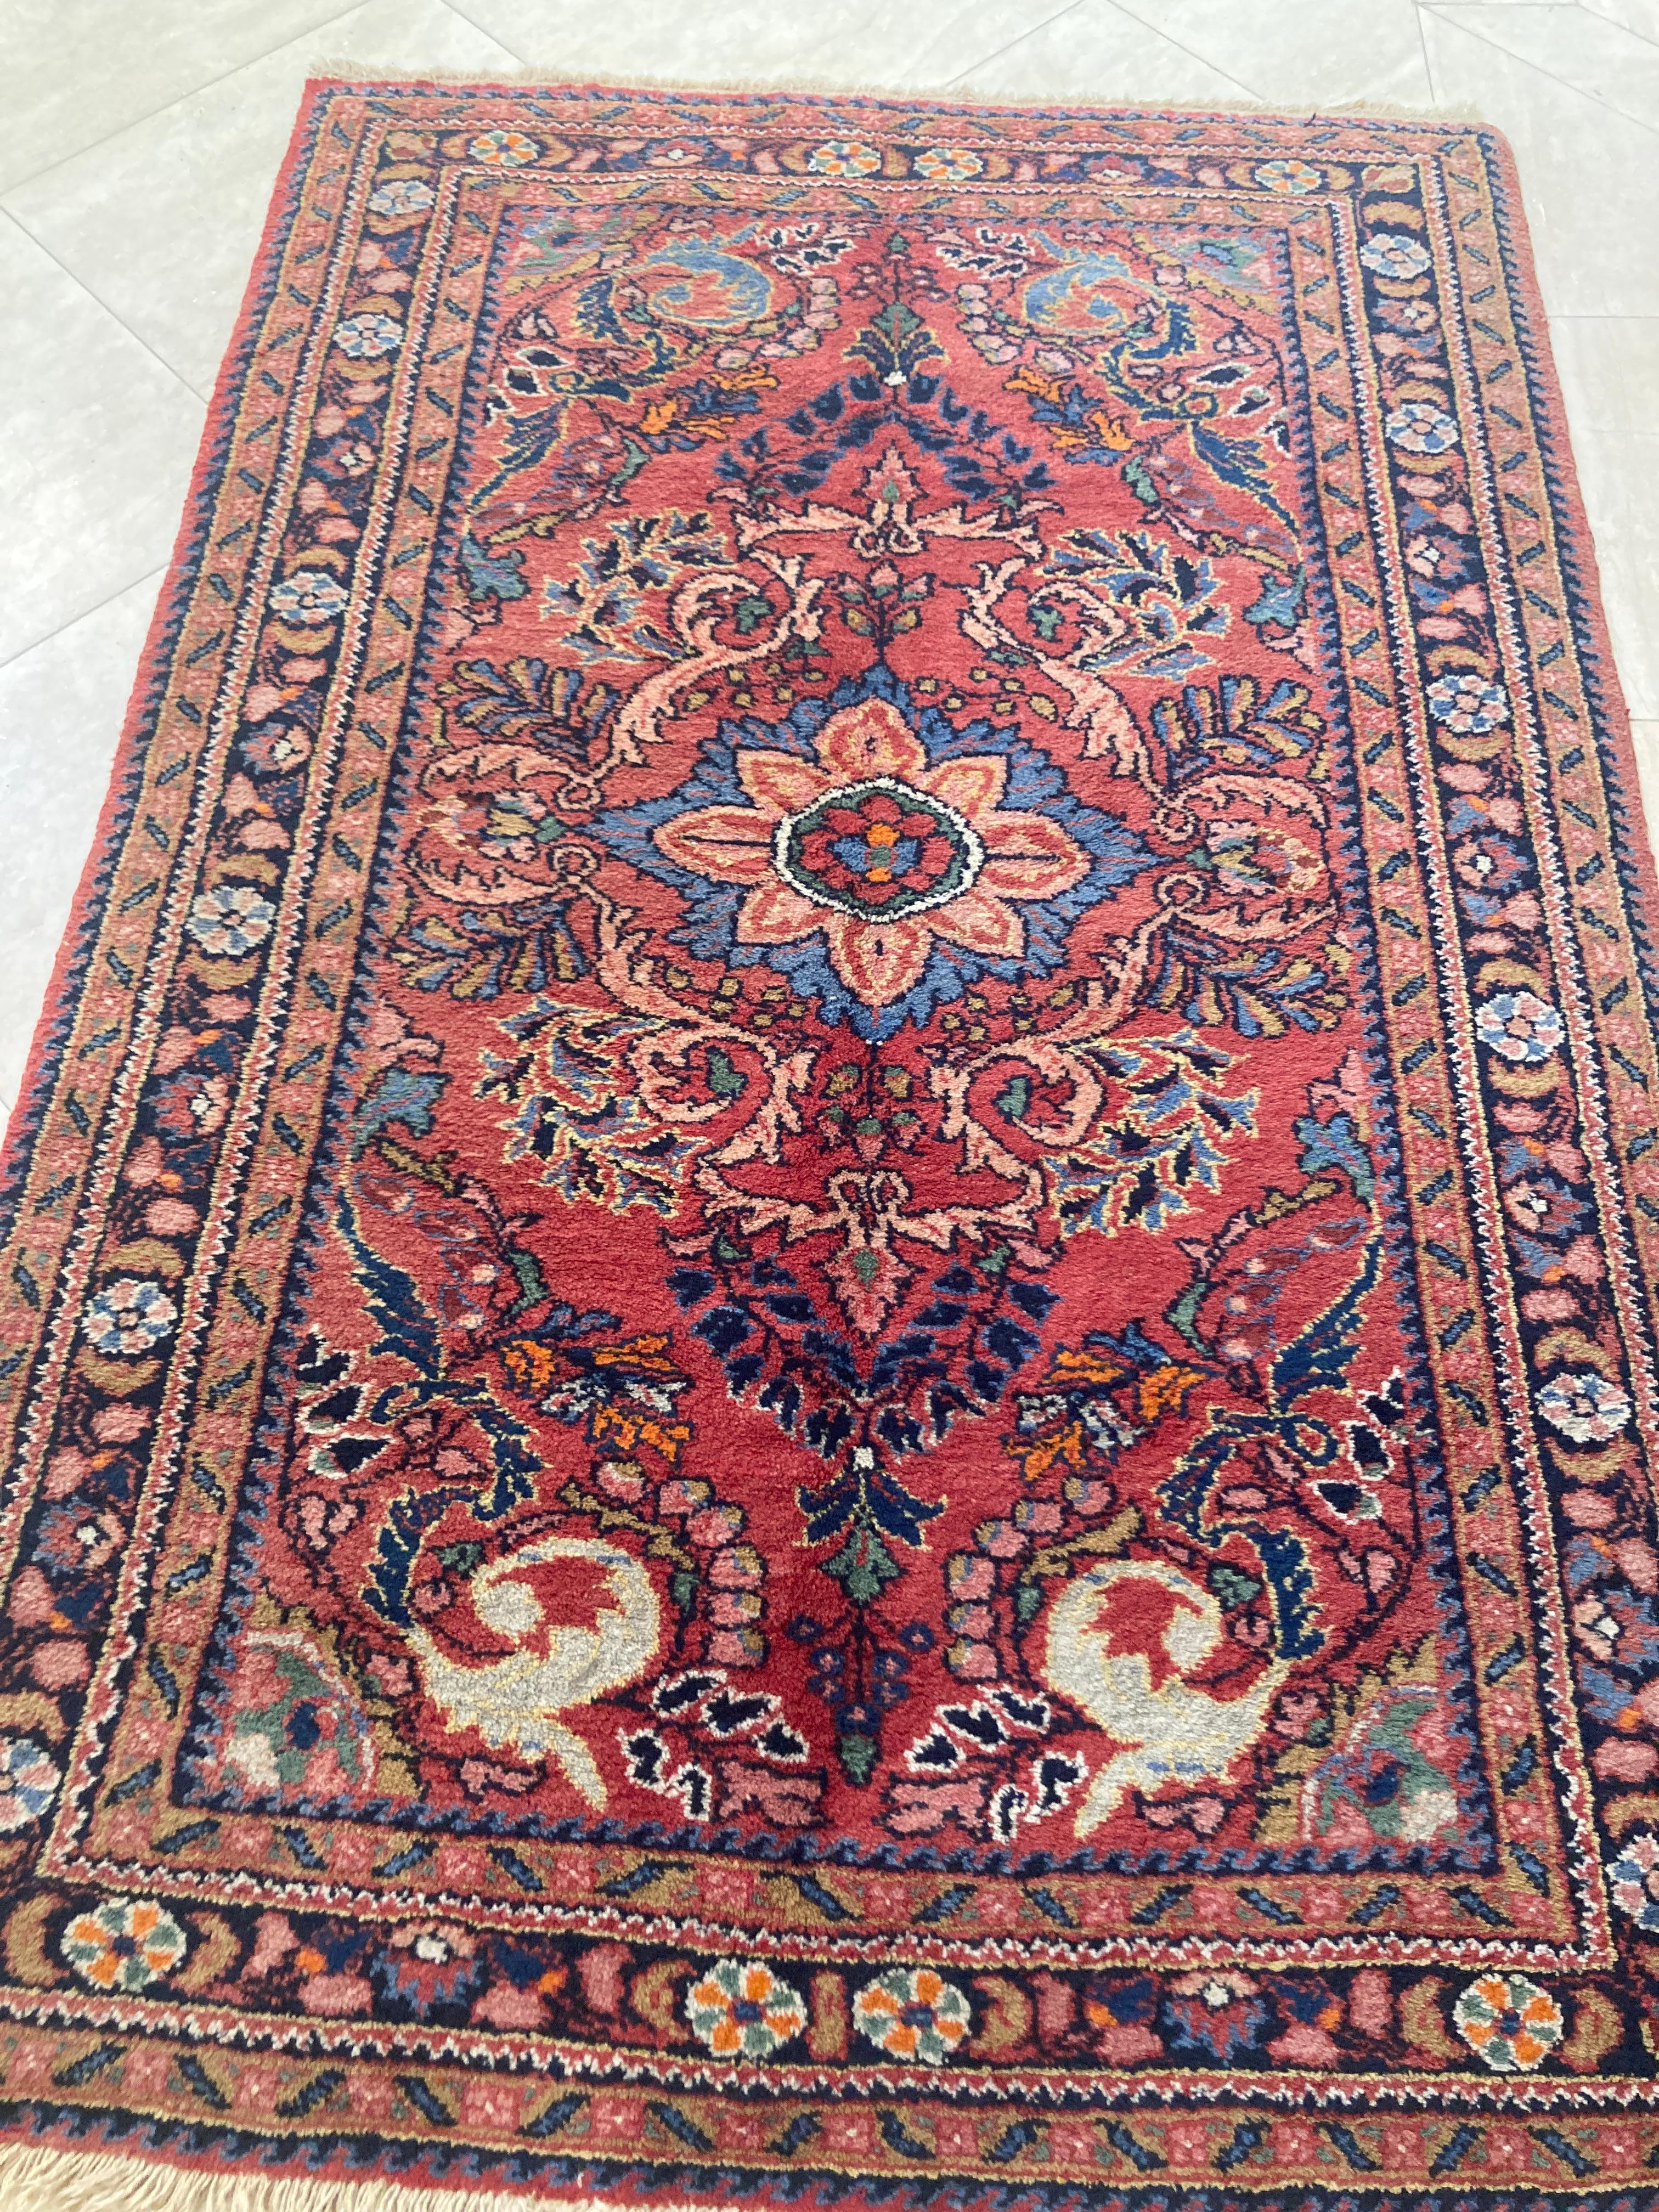 Antique Turkish Hand-Knotted Ethnic Rug, 1940 For Sale 8